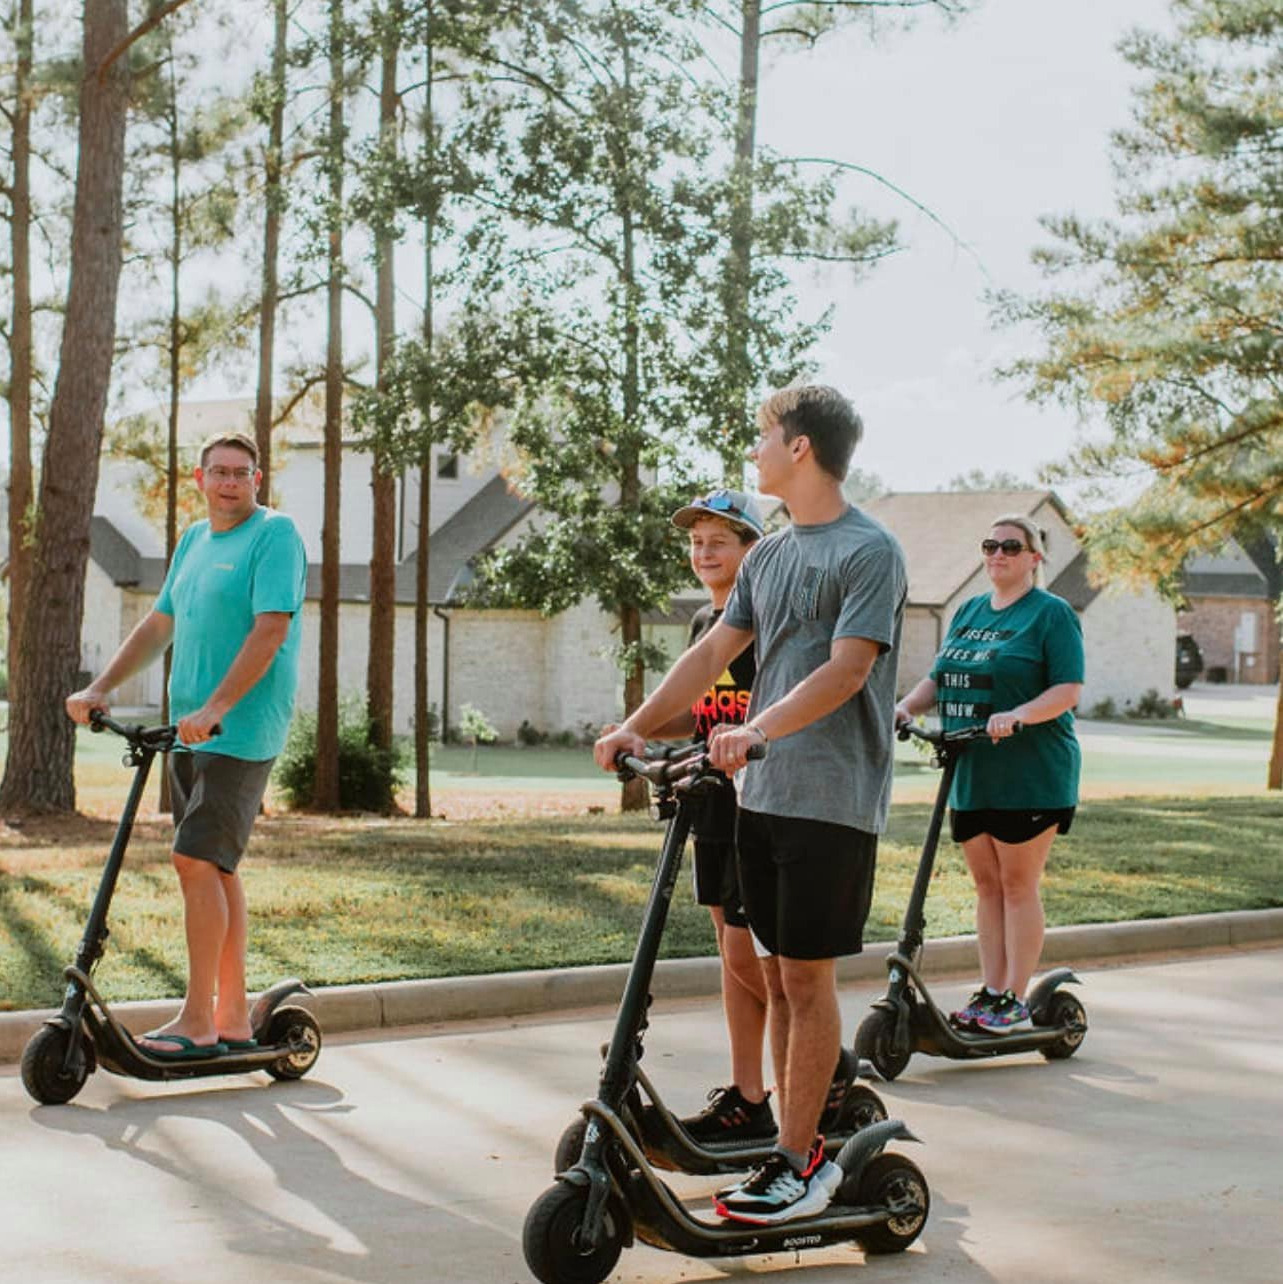 Family fun on our scooters!